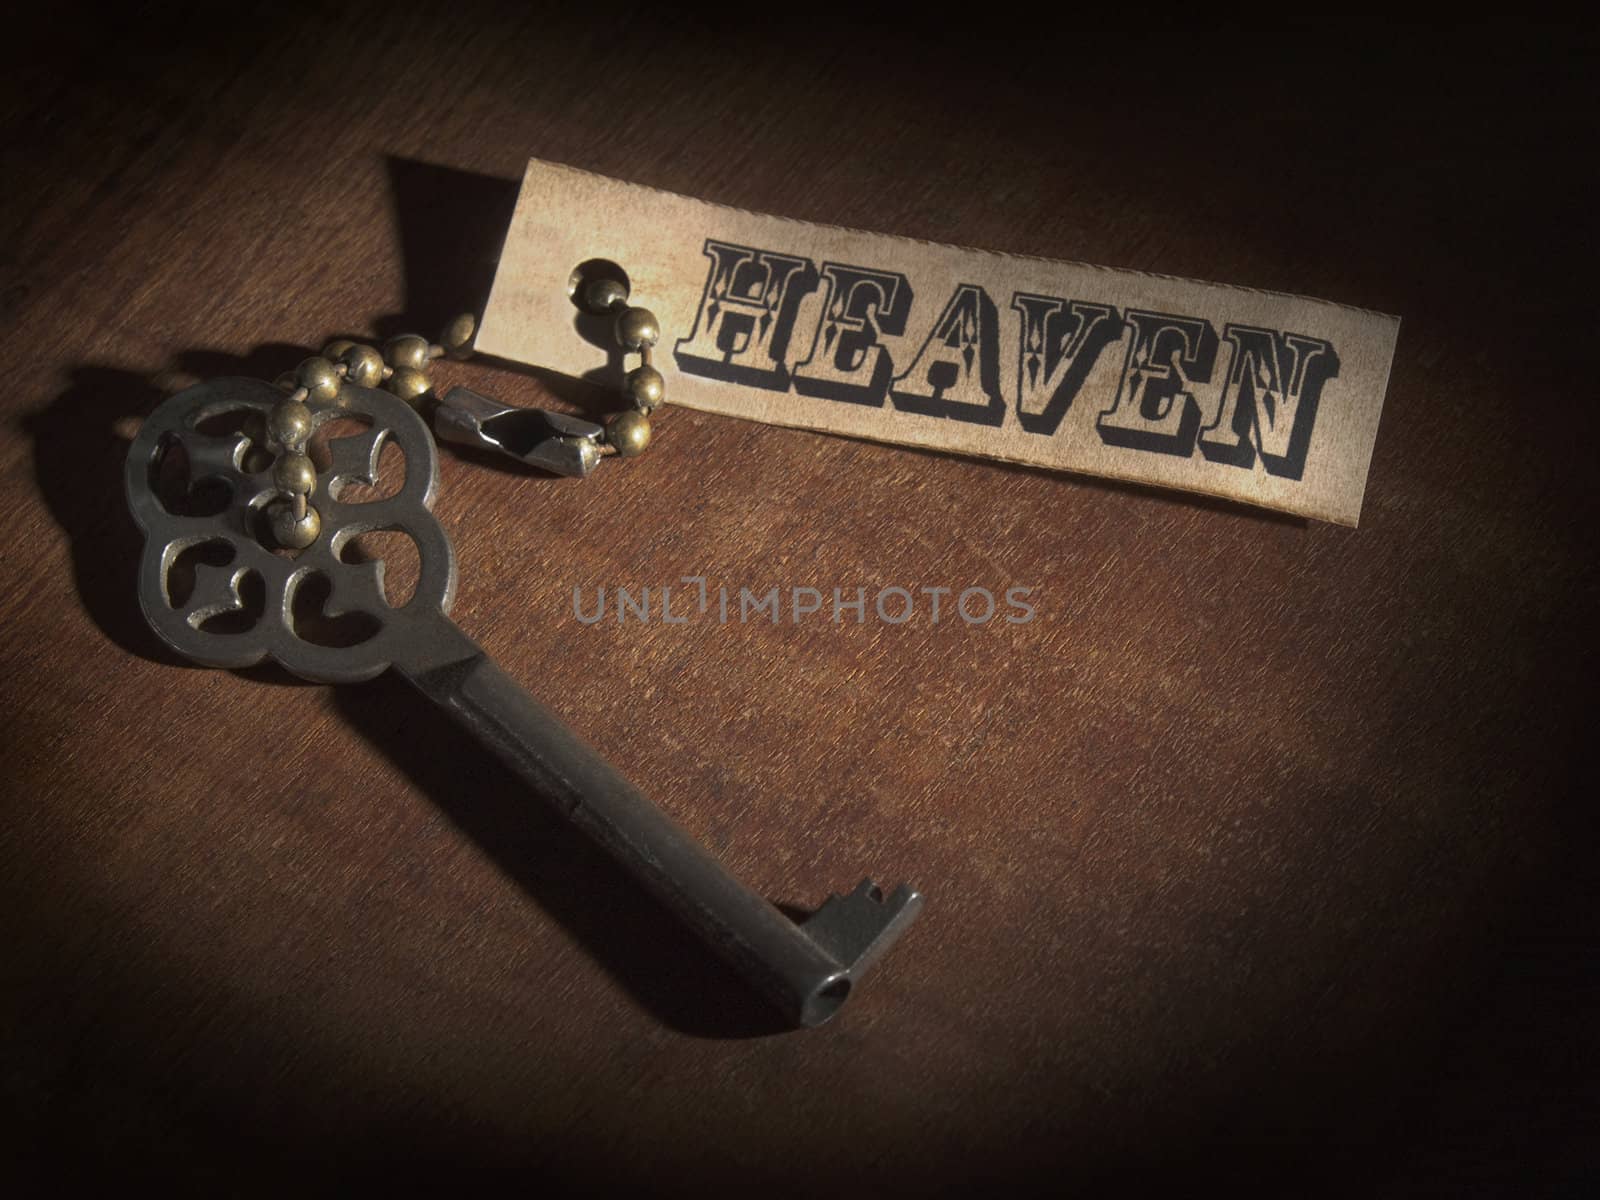 An old key attached to a label saying HEAVEN over a wooden table.